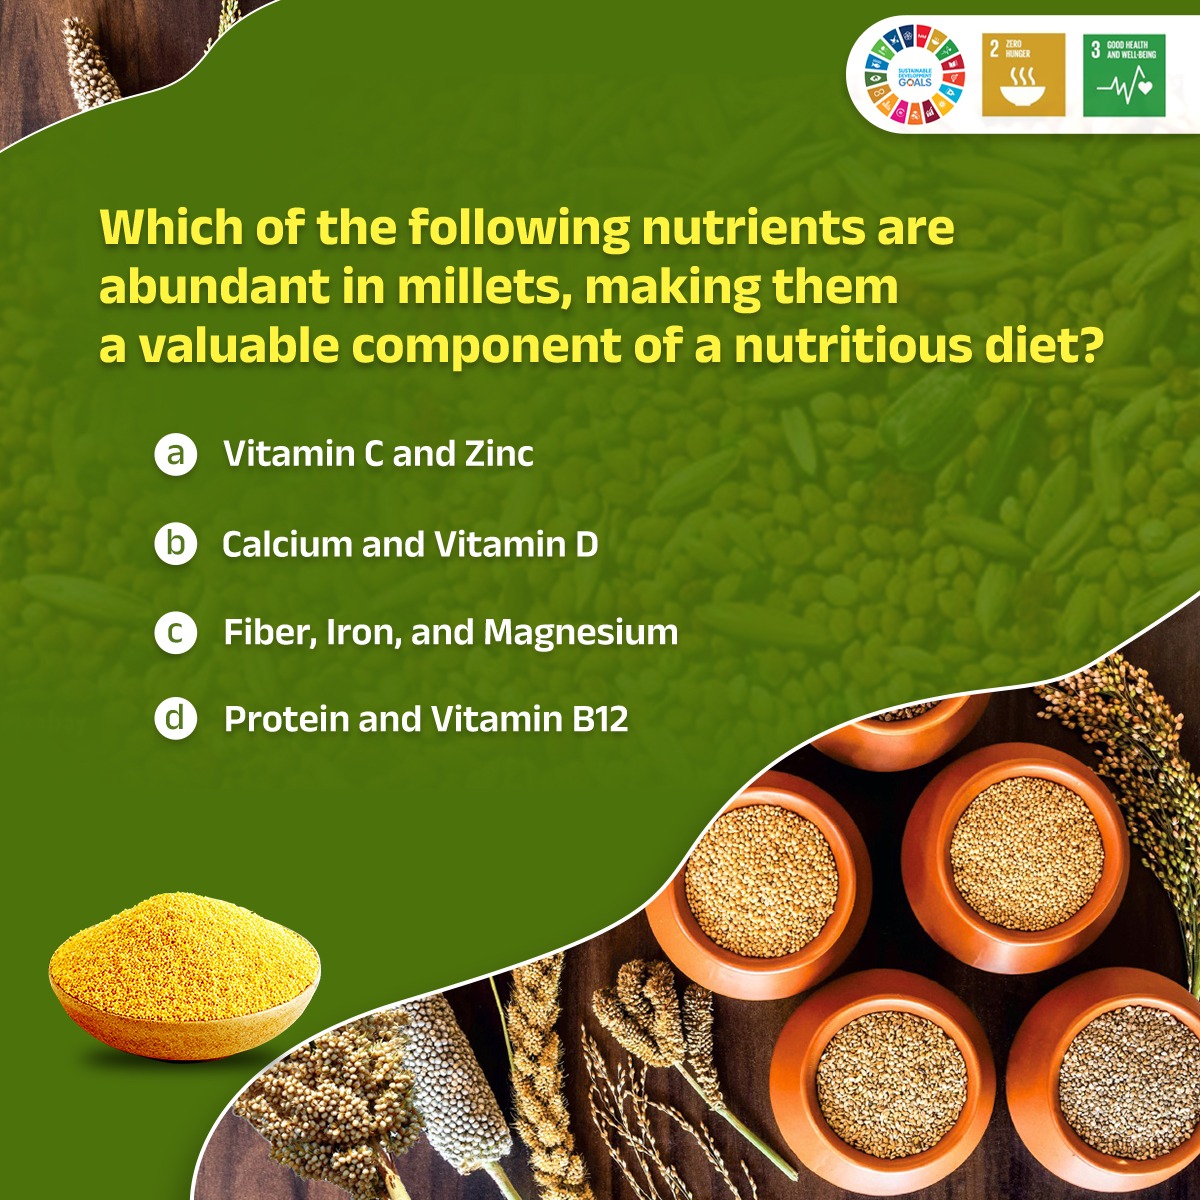 Quiz Time- Which of the following nutrients are abundant in millets, making them a valuable component of a nutritious diet? (a)Vitamin C and Zinc (b)Calcium and Vitamin D (c)Fiber, Iron, and Magnesium (d)Protein and Vitamin B12 @PCDept_Odisha @SDGOdisha